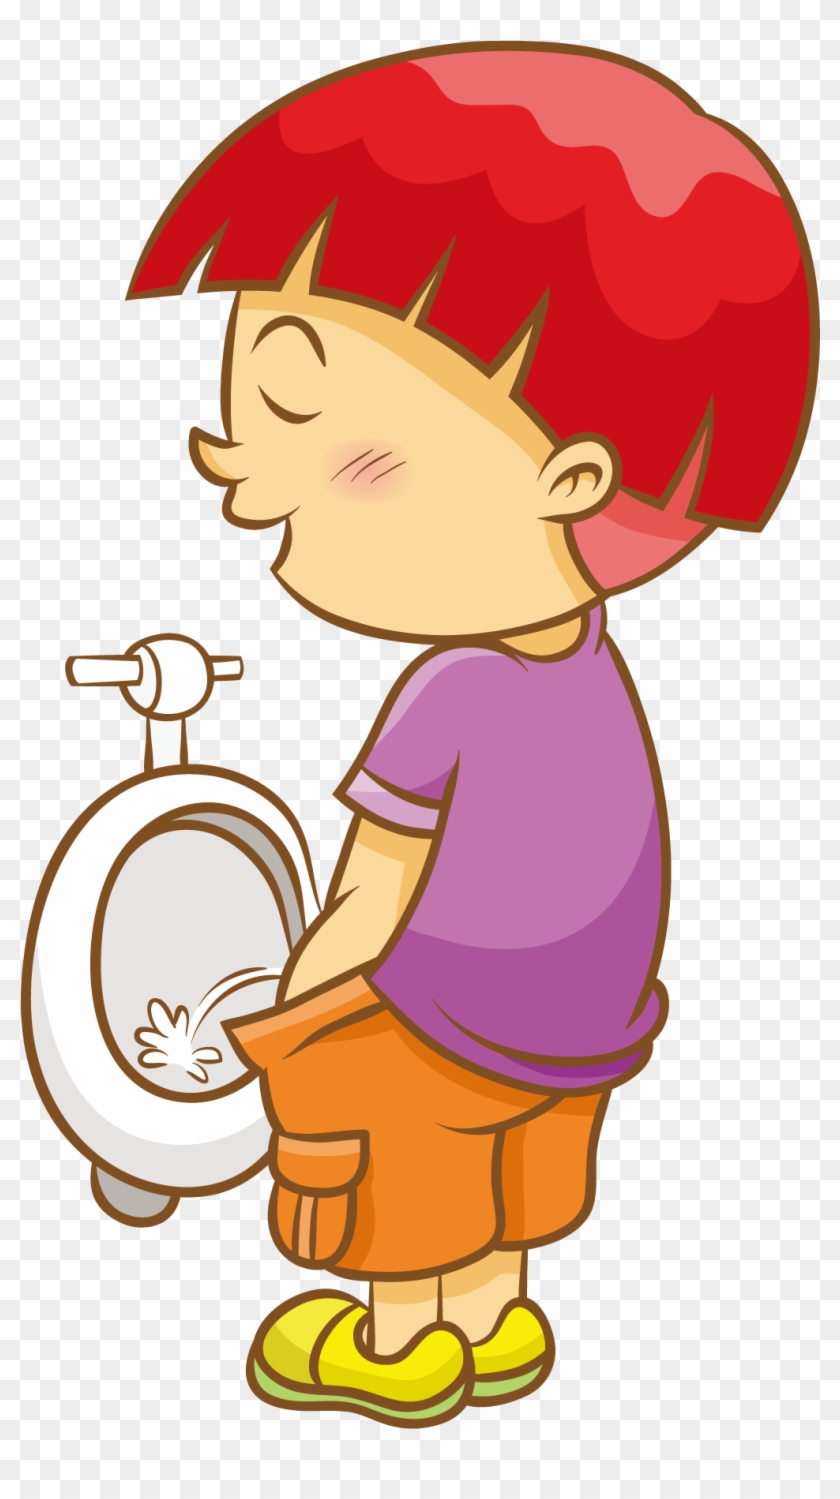 The Boy On The Toilet - Morning Activities Clipart #315388